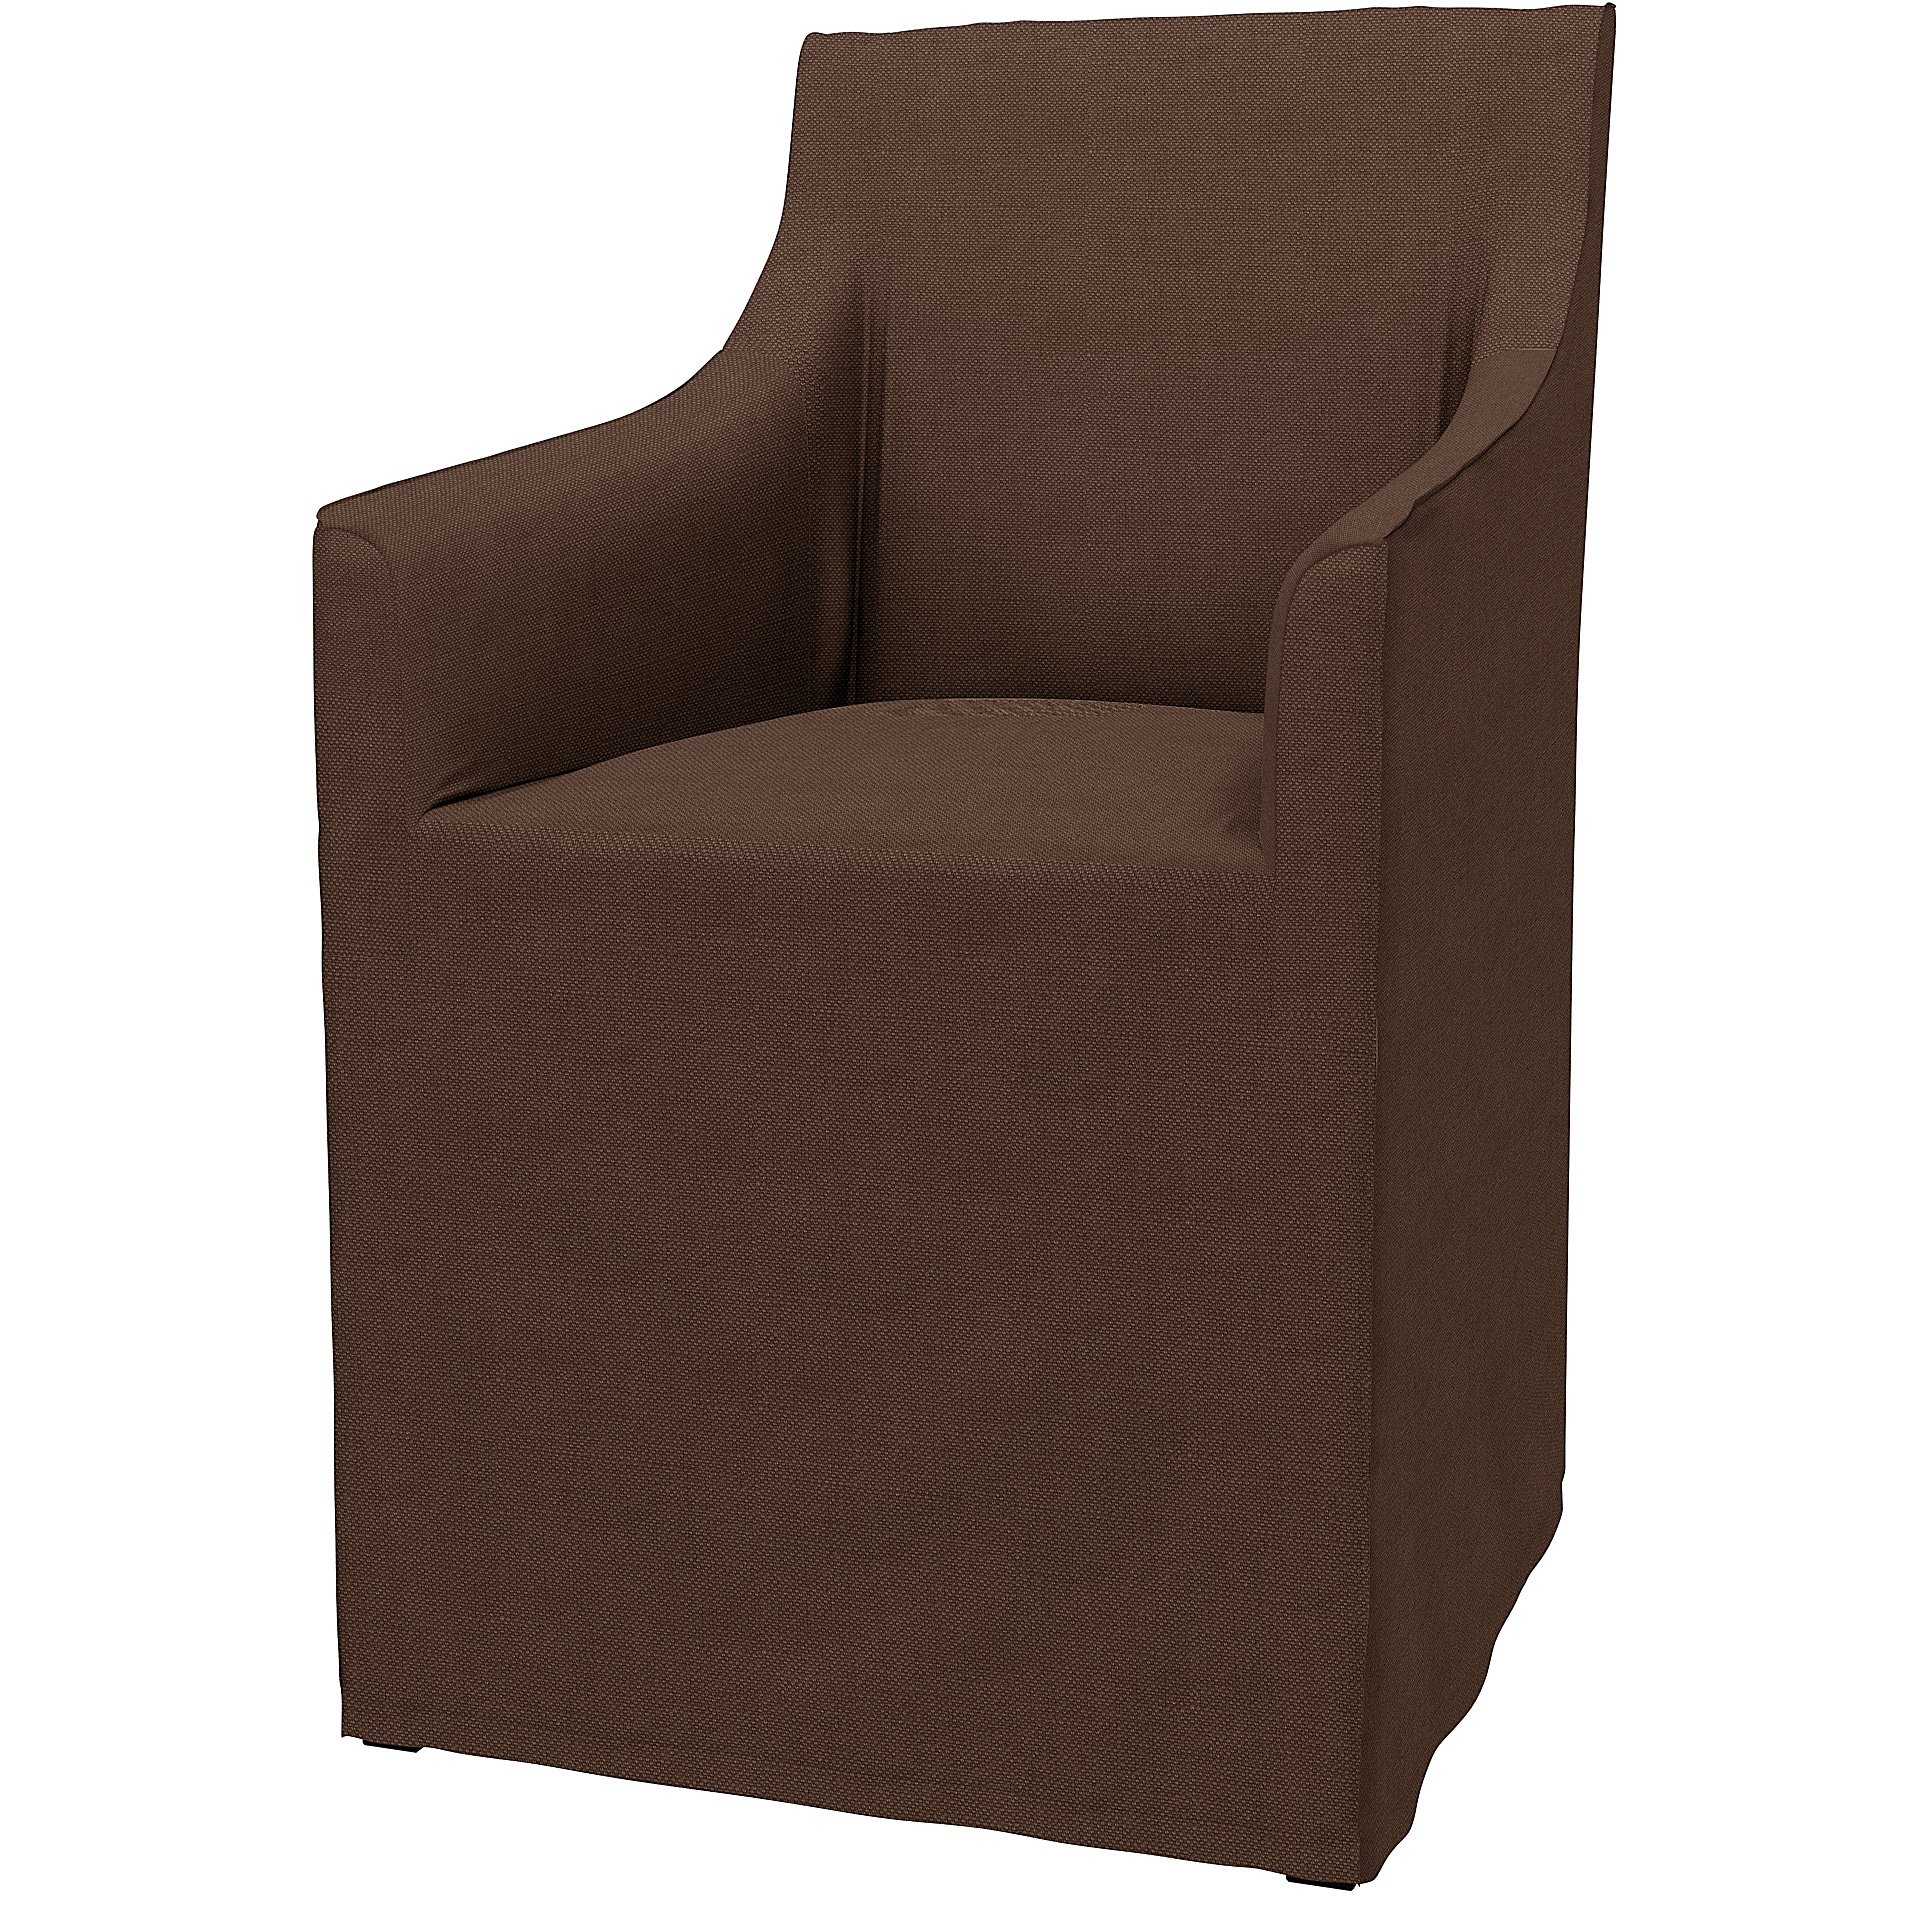 IKEA - Sakarias Chair with Armrests Cover, Chocolate, Linen - Bemz